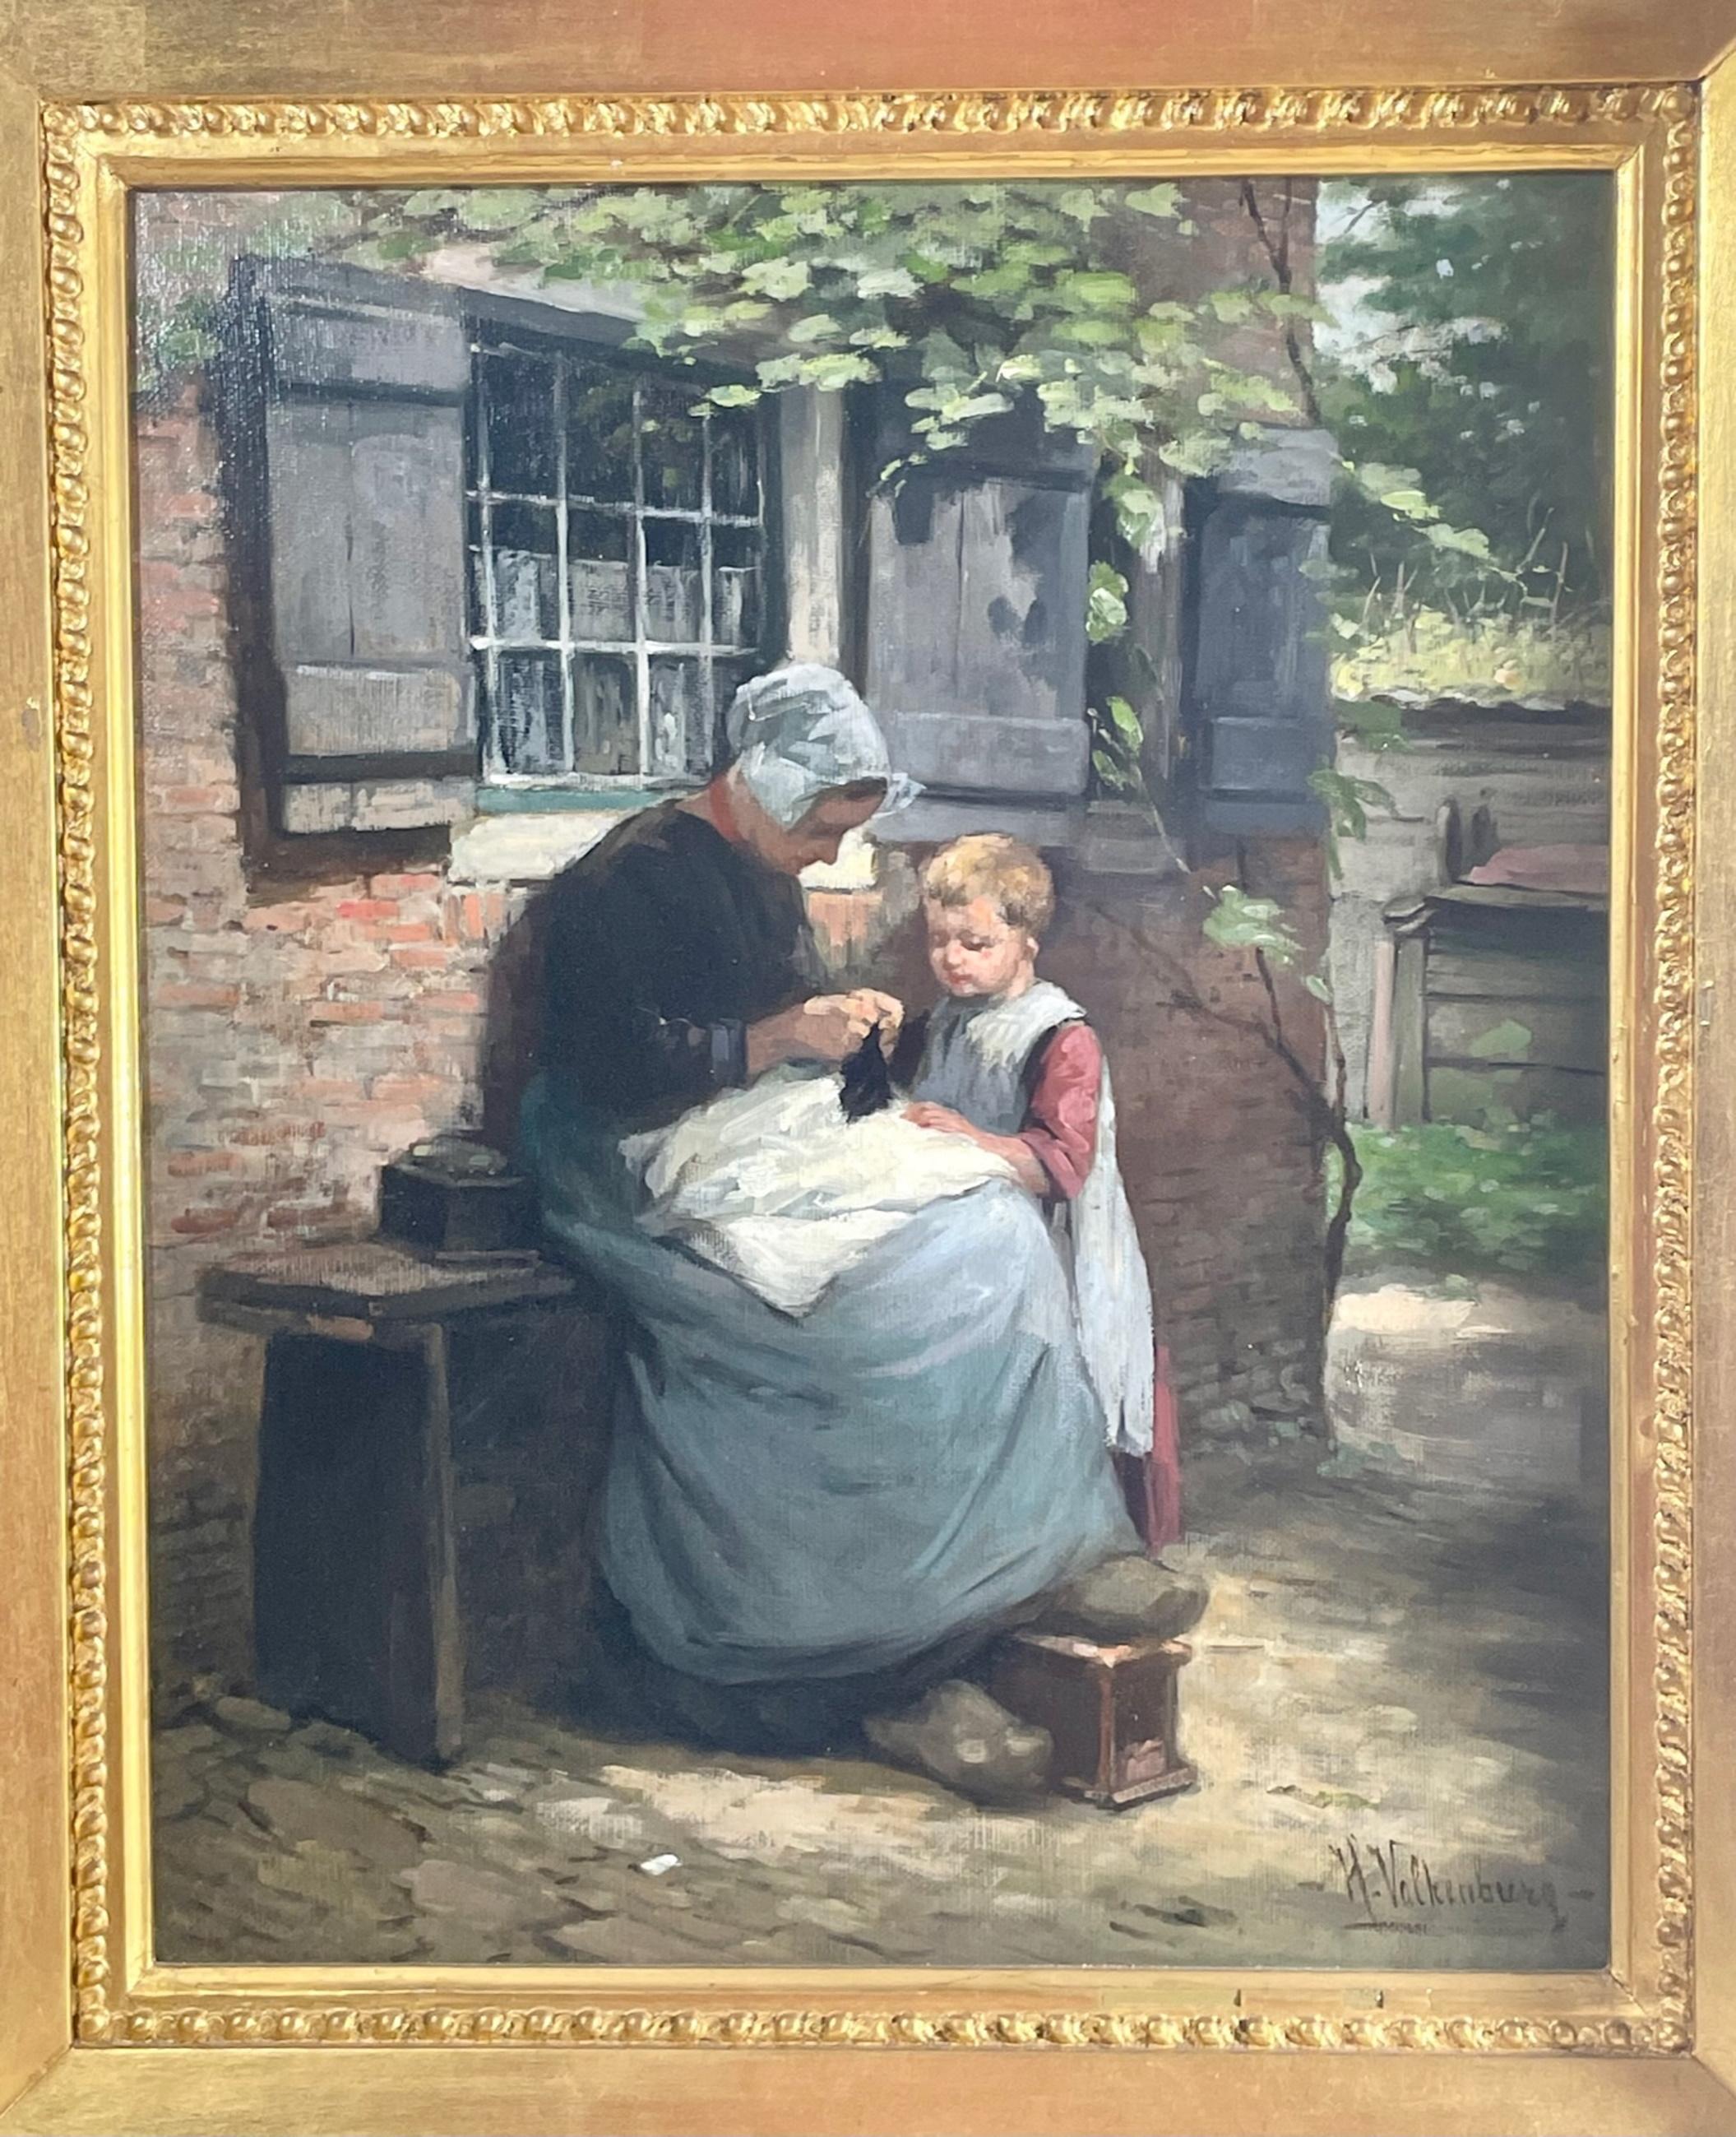 19th Century signed Dutch Master painting oil on canvas of mother and child.

This wonderful piece is visually stunning. The artist uses traditional Academic Realism to create this portrait of motherhood. He is evoking a narrative through the